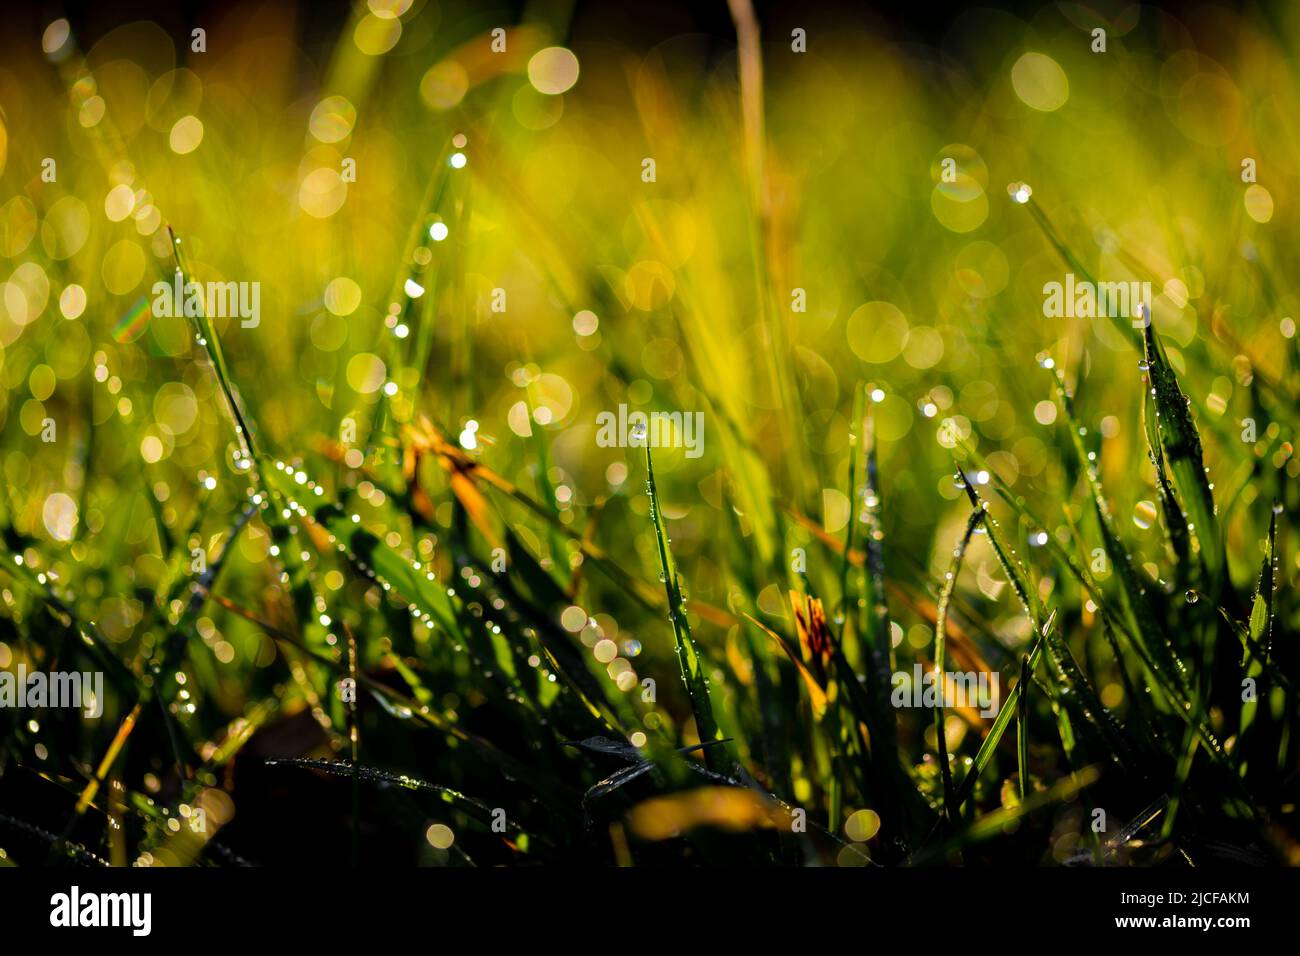 wet leaves with raindrops, very shallow depth of field for beautiful aperture circles in the background Stock Photo